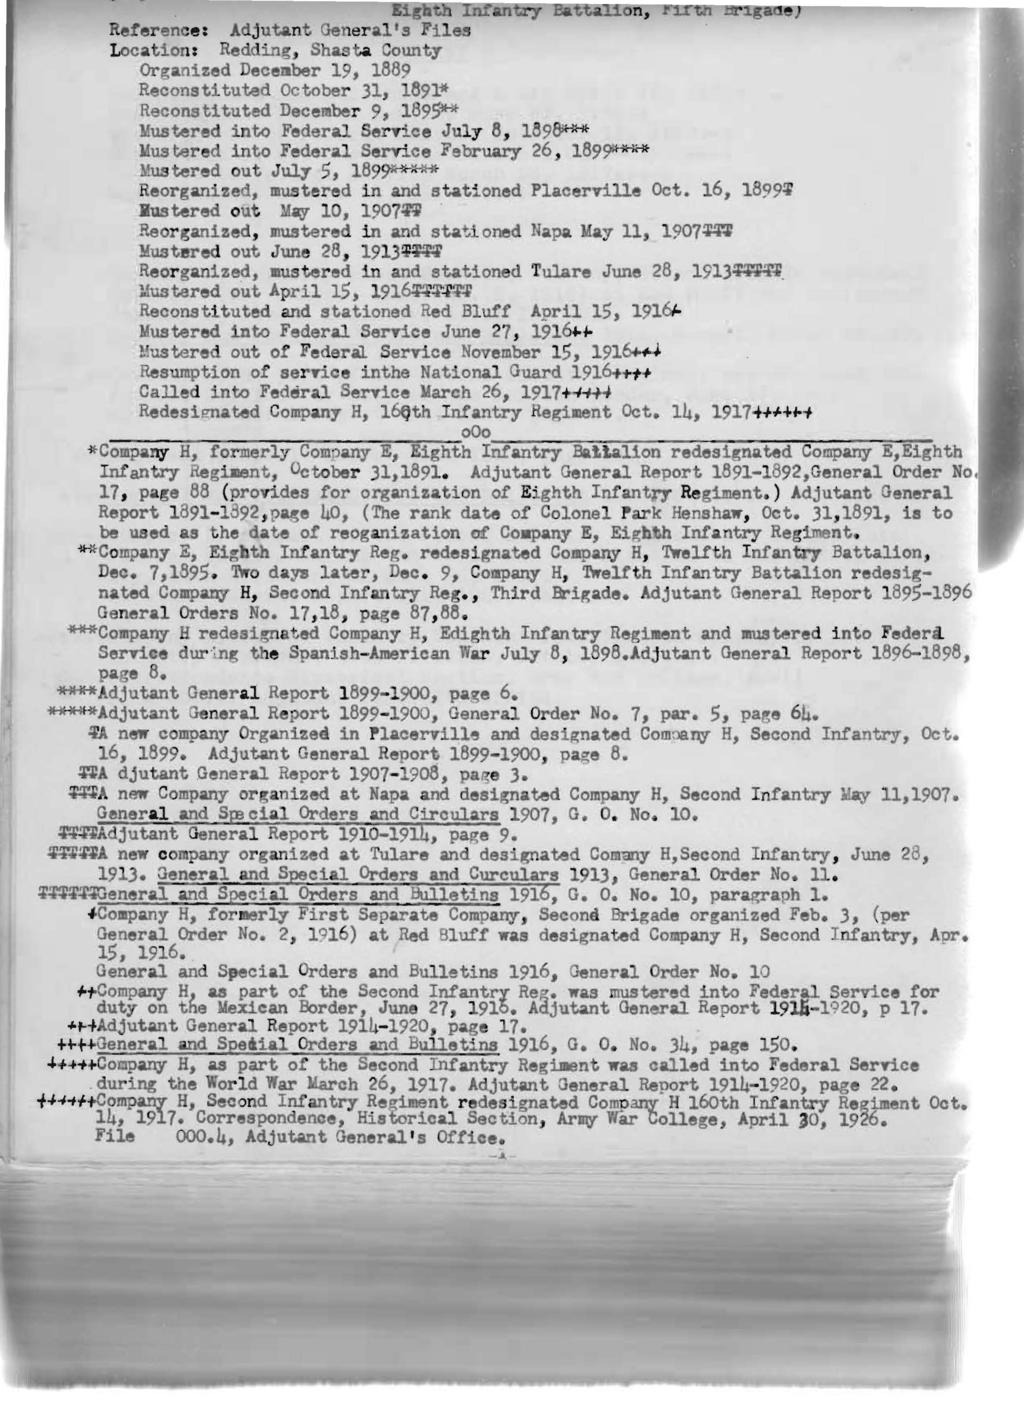 Reference: Adj utant General's F Location: Red ing, Sha ta County Organized December 19, 1889 Reconstituted October 31, 1691* Reconstituted December 9, 1B95** Mustered into Federal SerTice July 8, 1